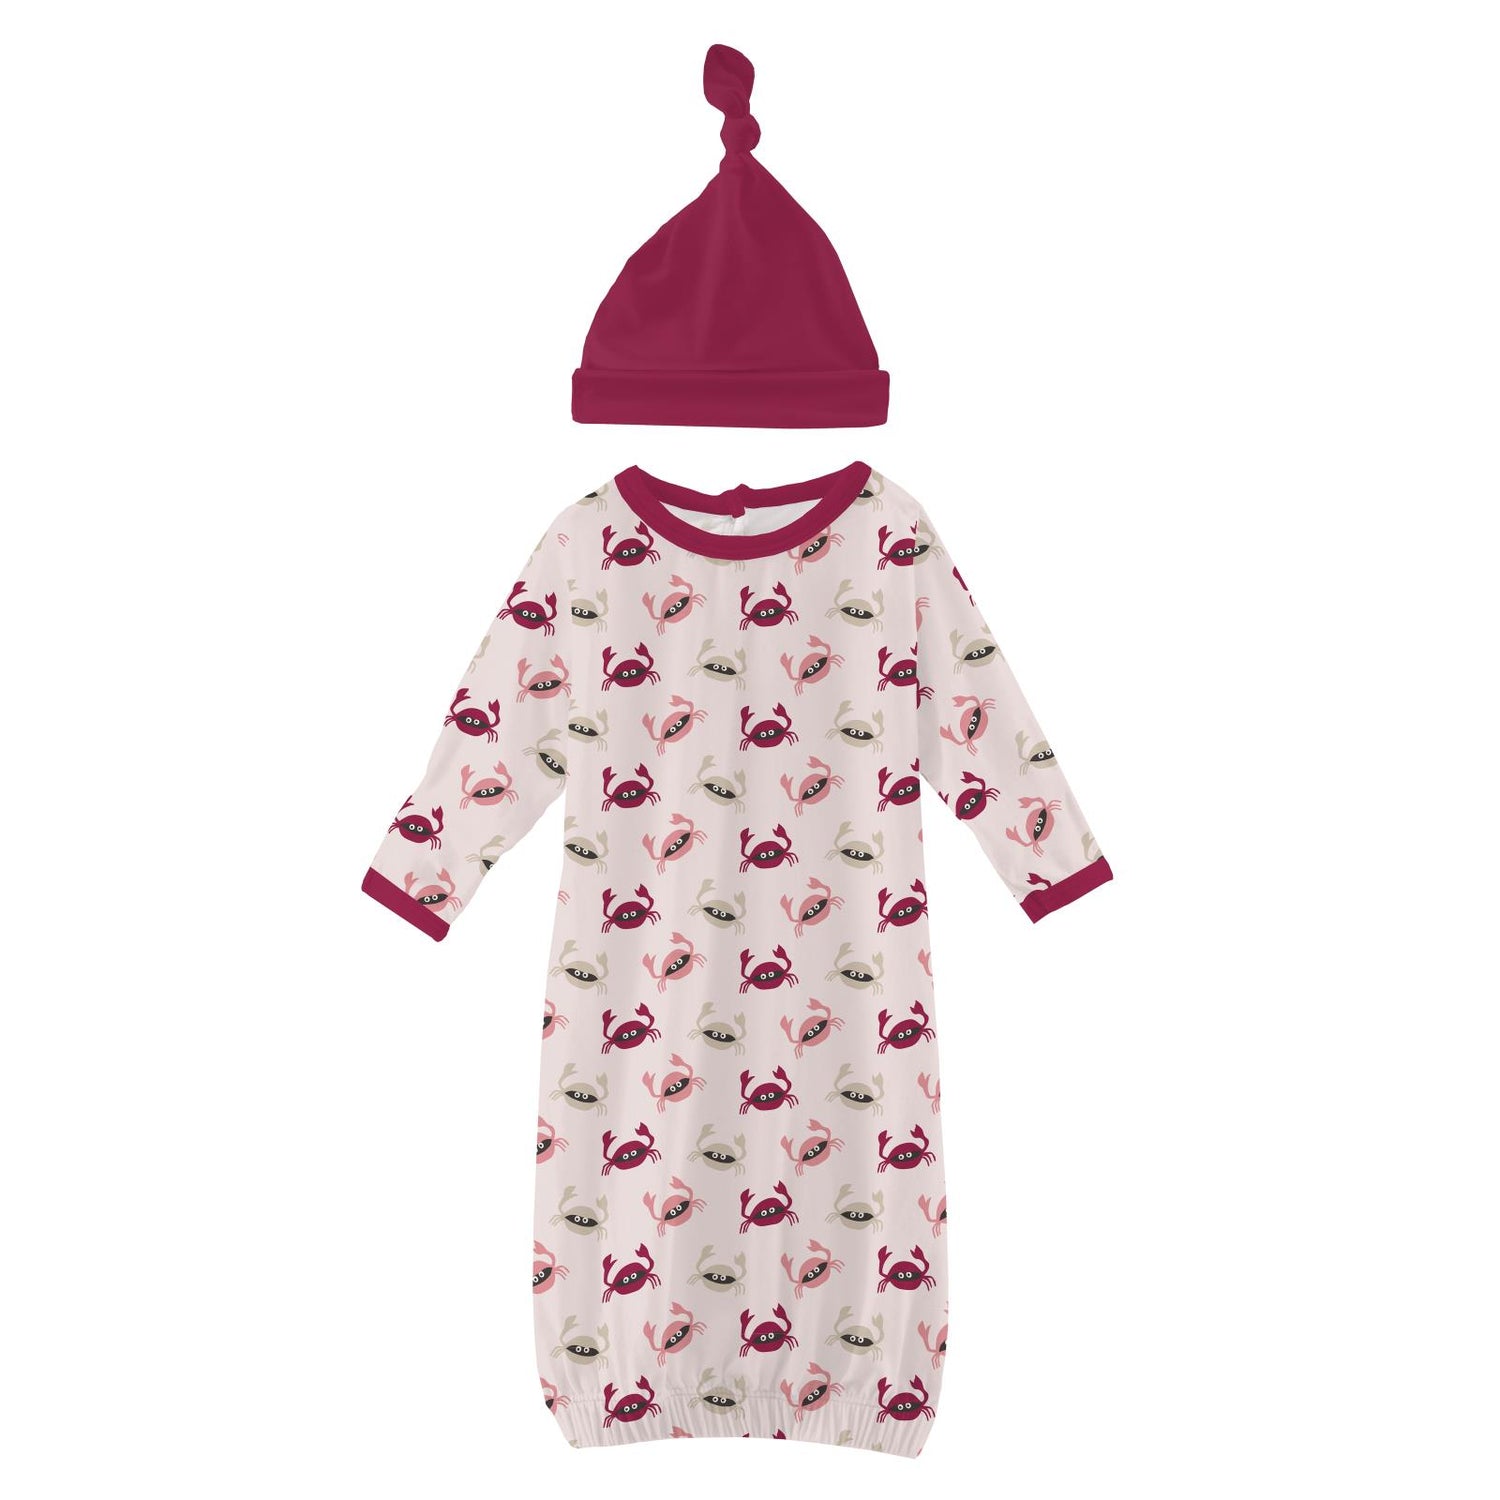 Print Layette Gown & Single Knot Hat Set in Macaroon Crabs